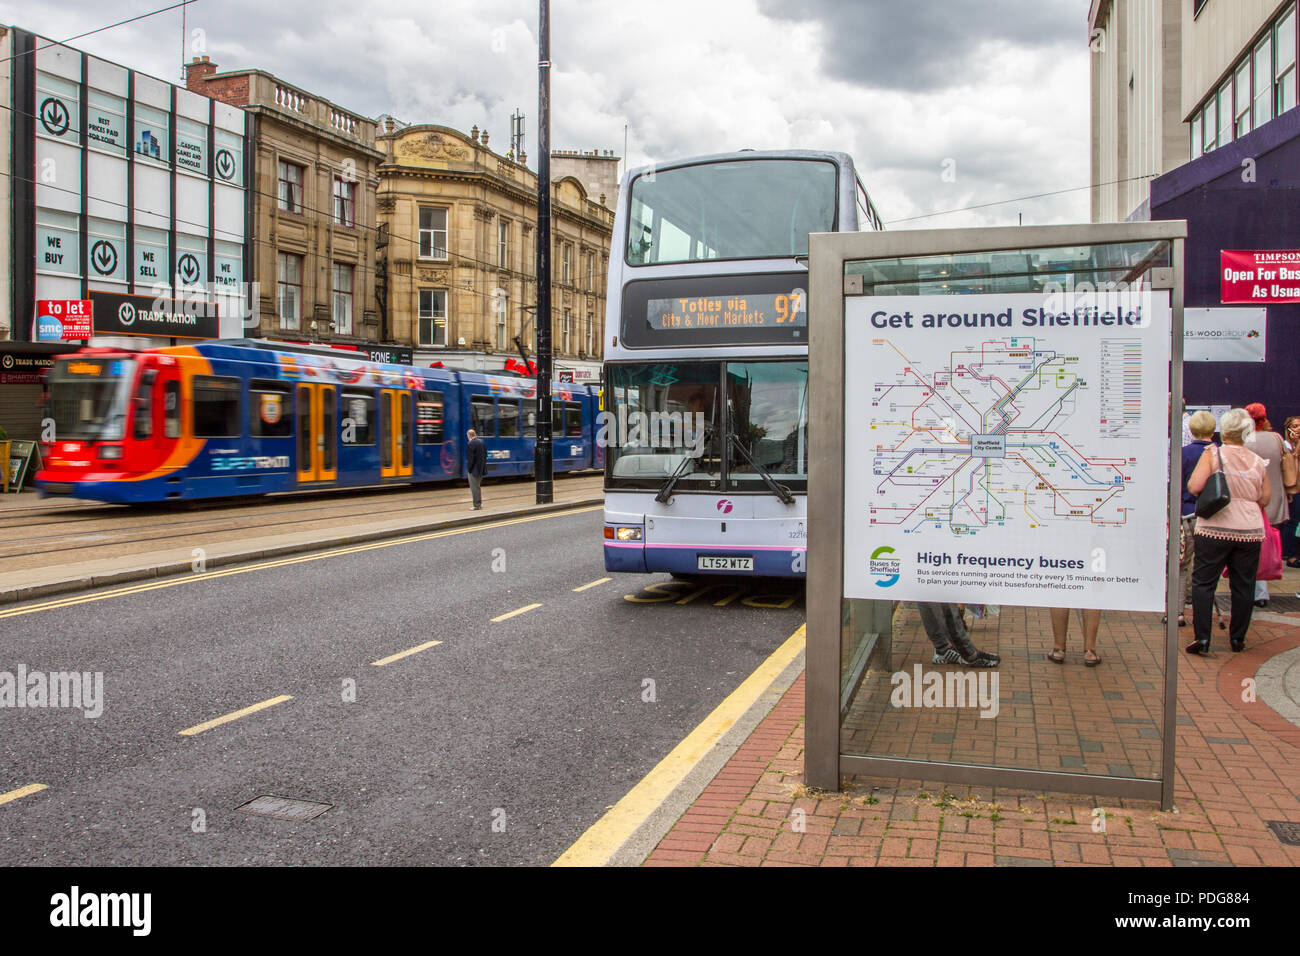 Bus, bus stop, buses and trams 'Get around Sheffield' city centre transport, UK Stock Photo